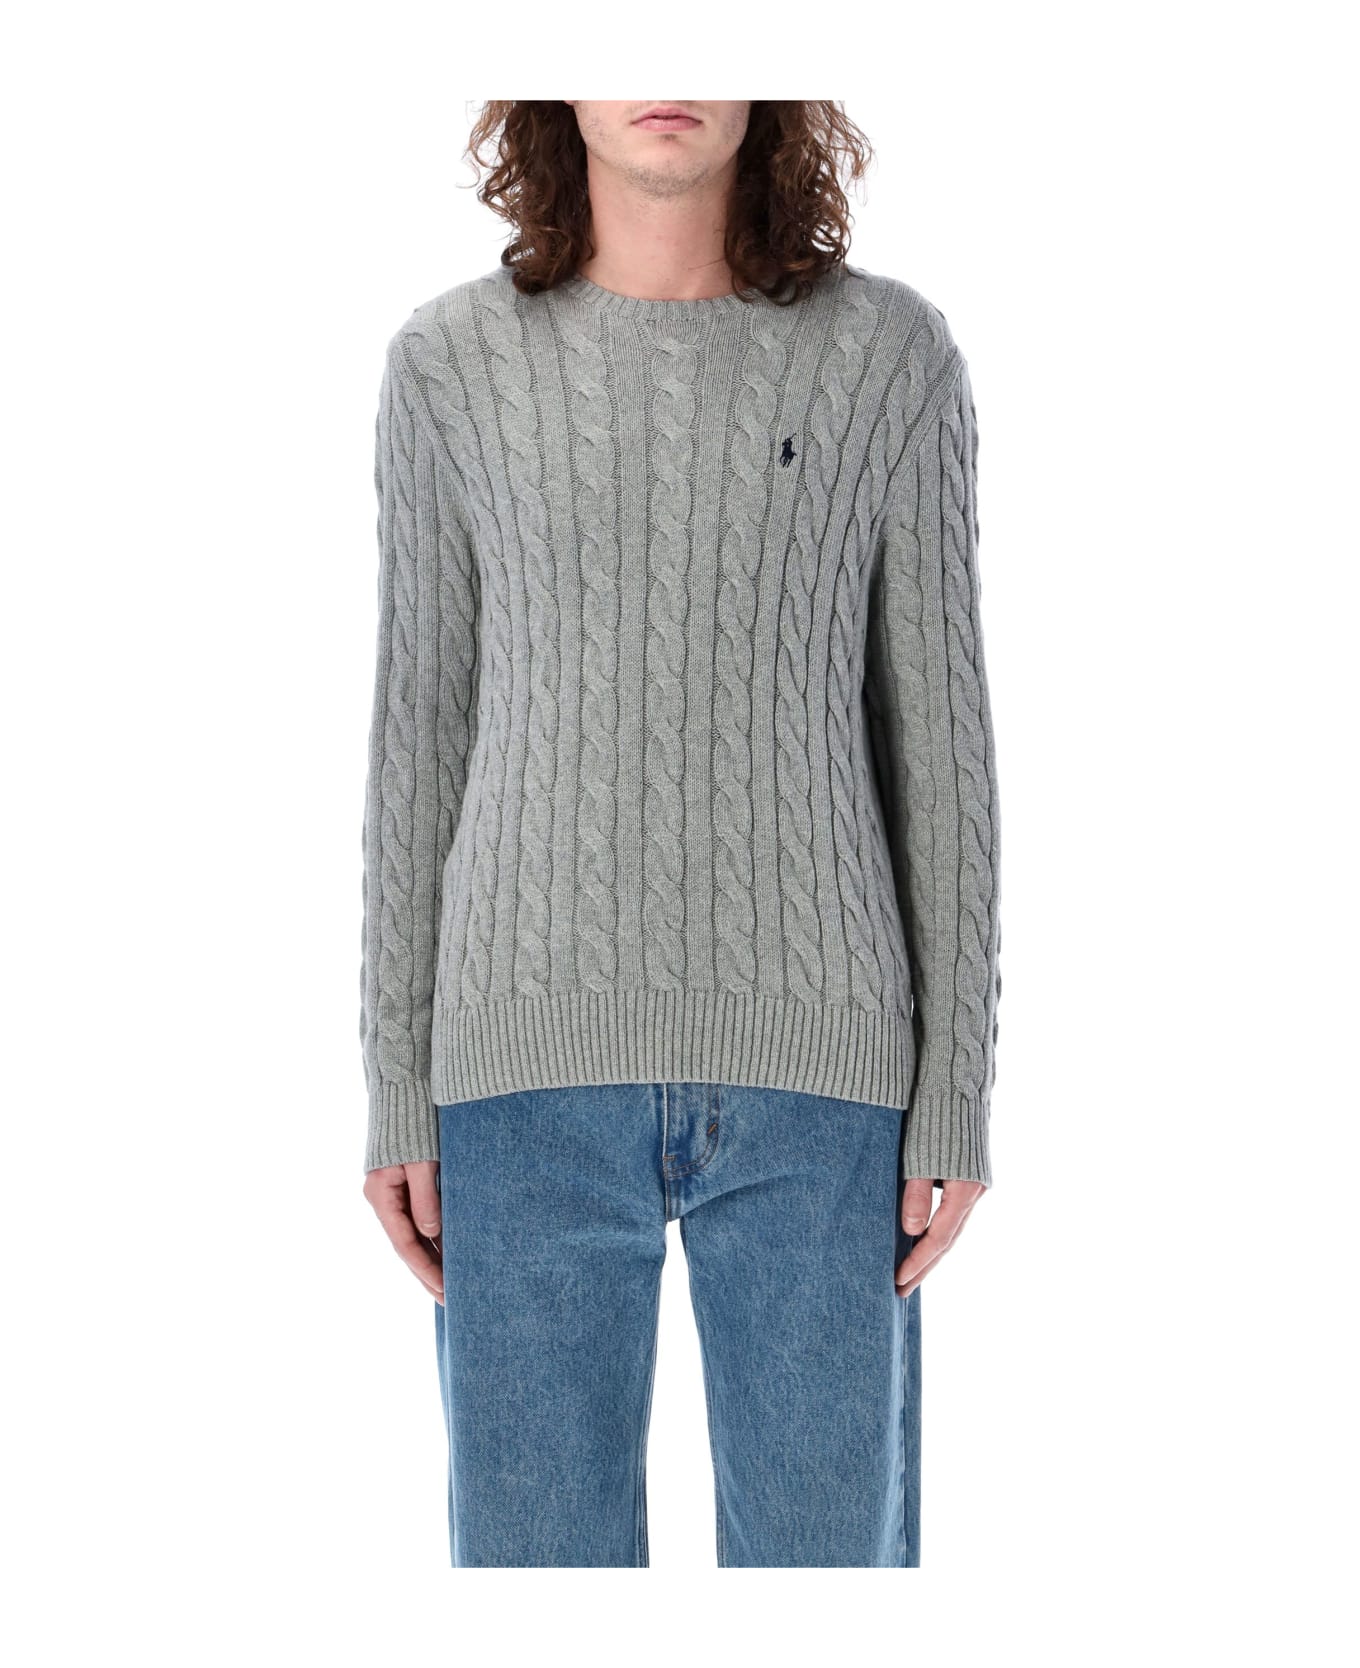 Polo Ralph Lauren Cable Knit Sweater - GREY ニットウェア